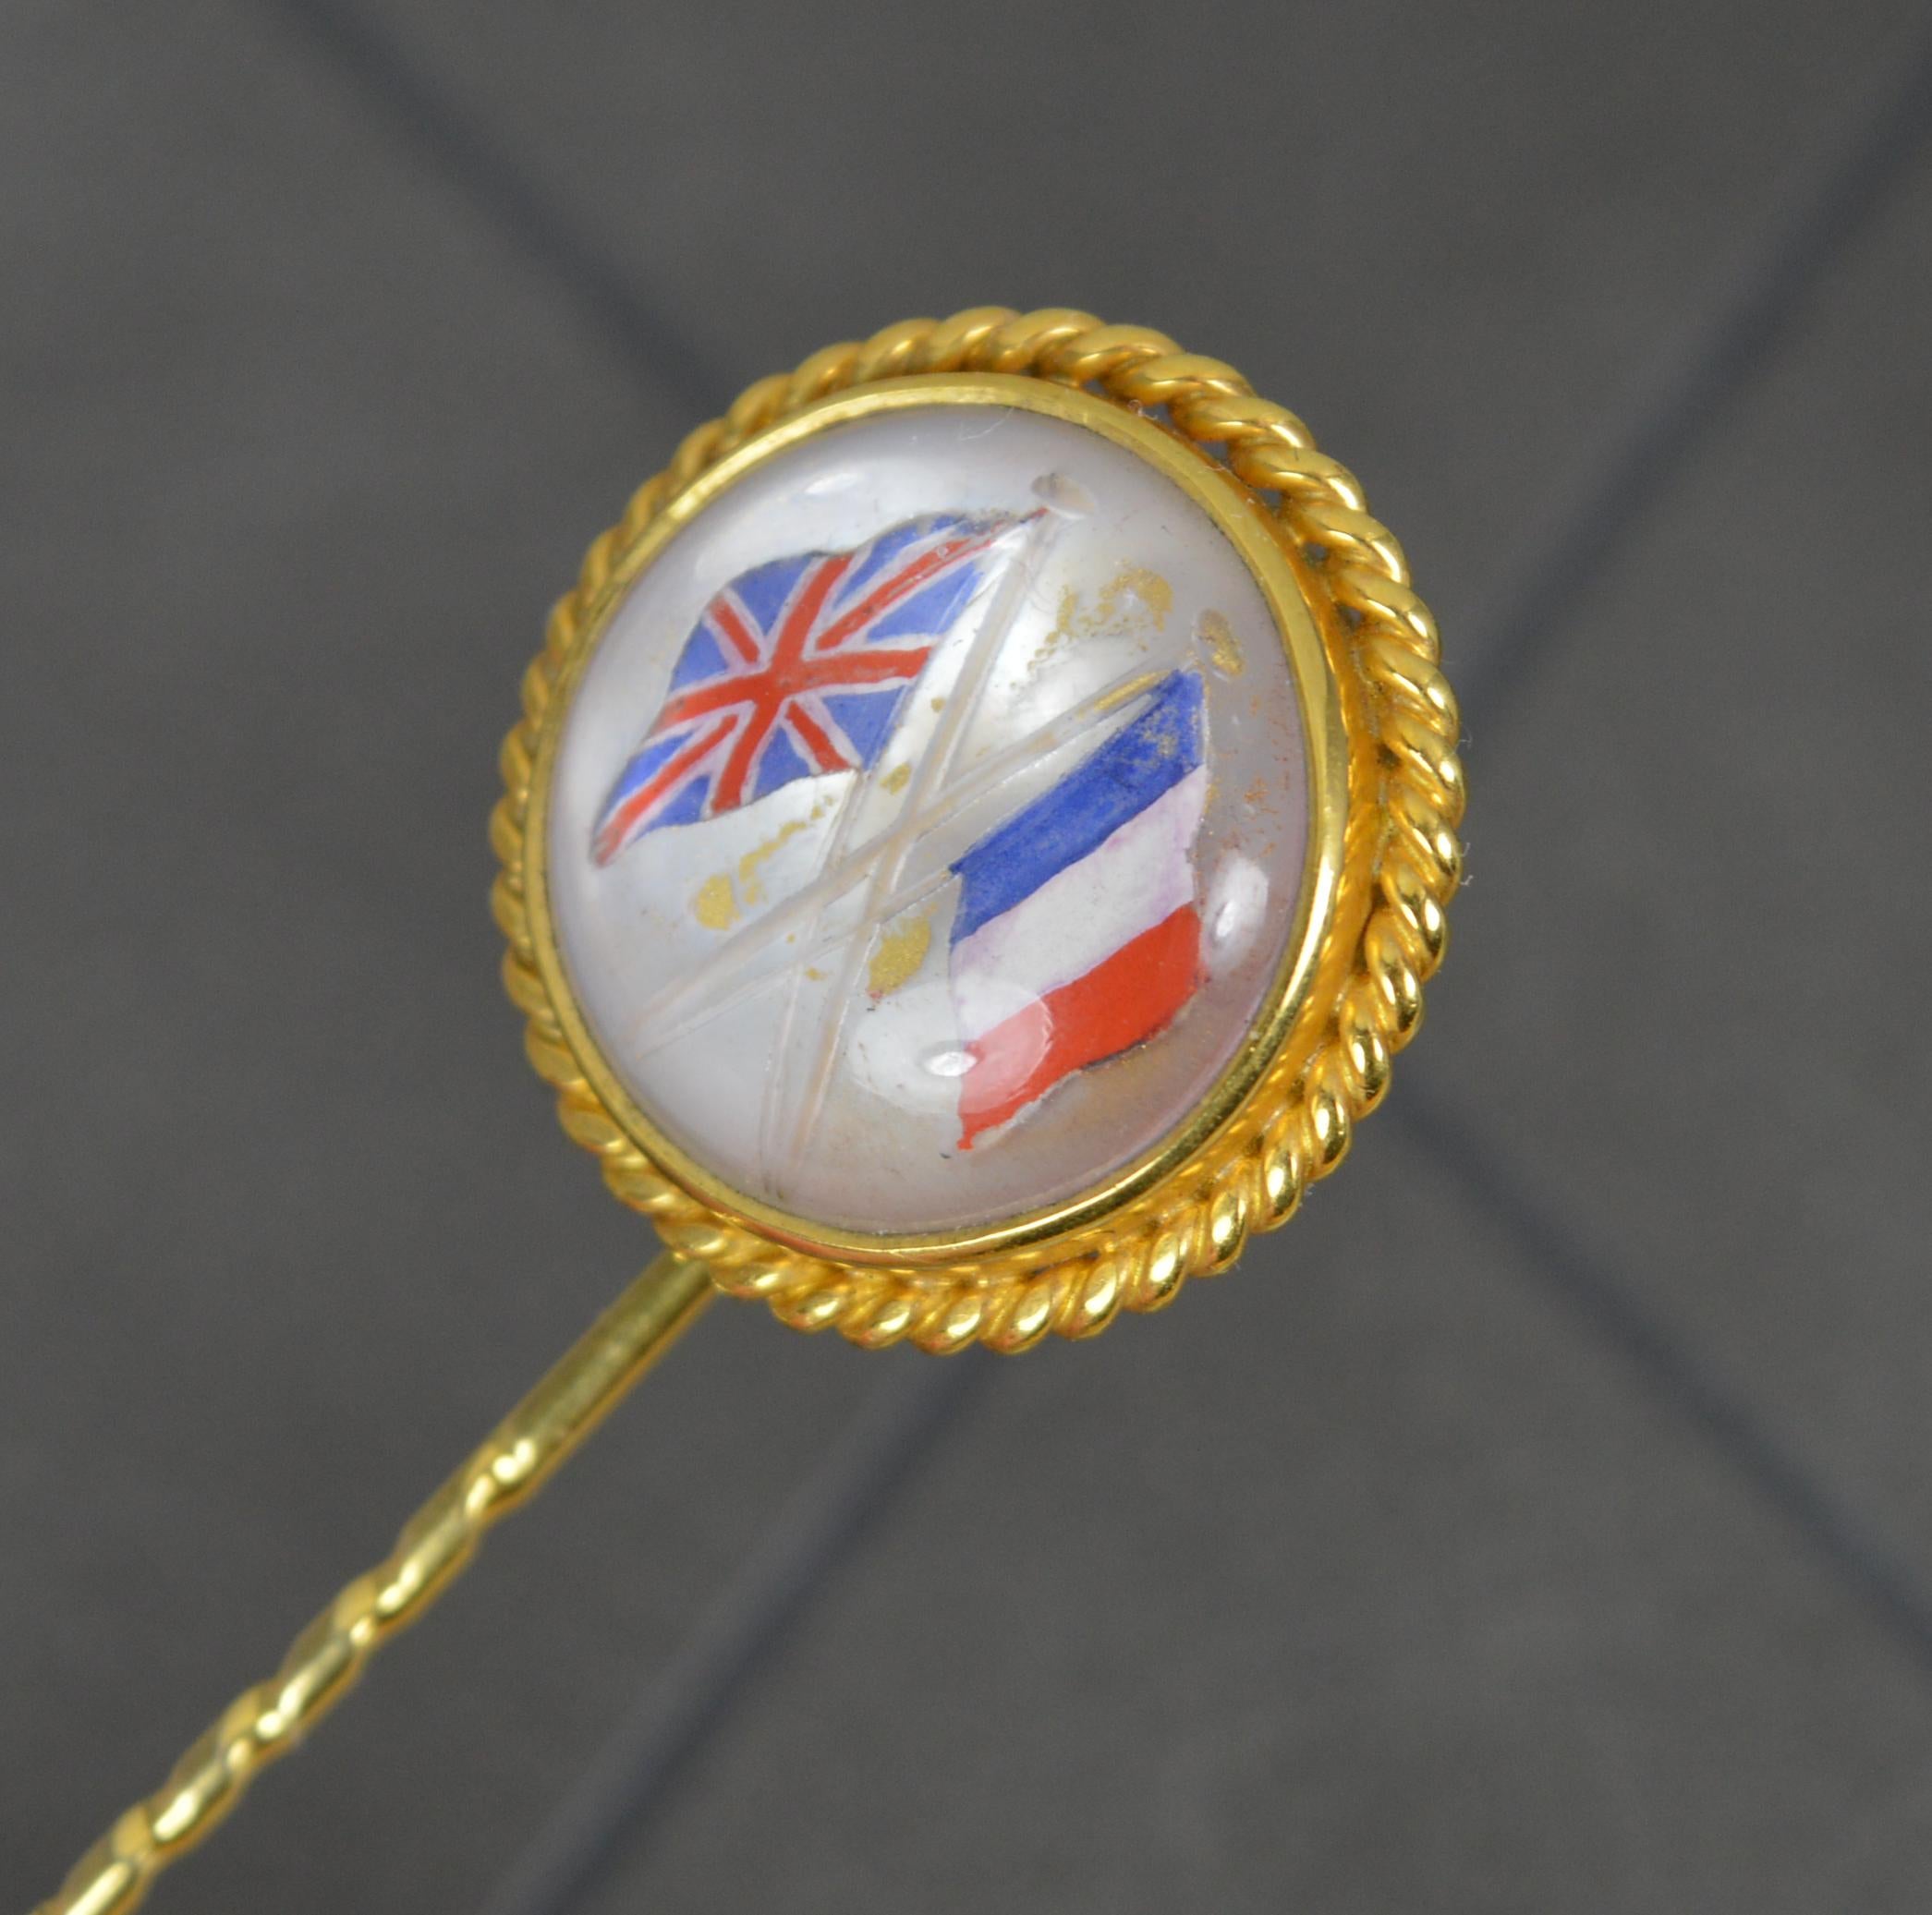 A stunning example of a late Victorian era stick / tie pin.
Solid 18 carat yellow gold.
Designed with a circular panel to top, Reverse essex crystal design with the UK and France flags. 

CONDITION ; Very good for age. Crisp design. Issue free.